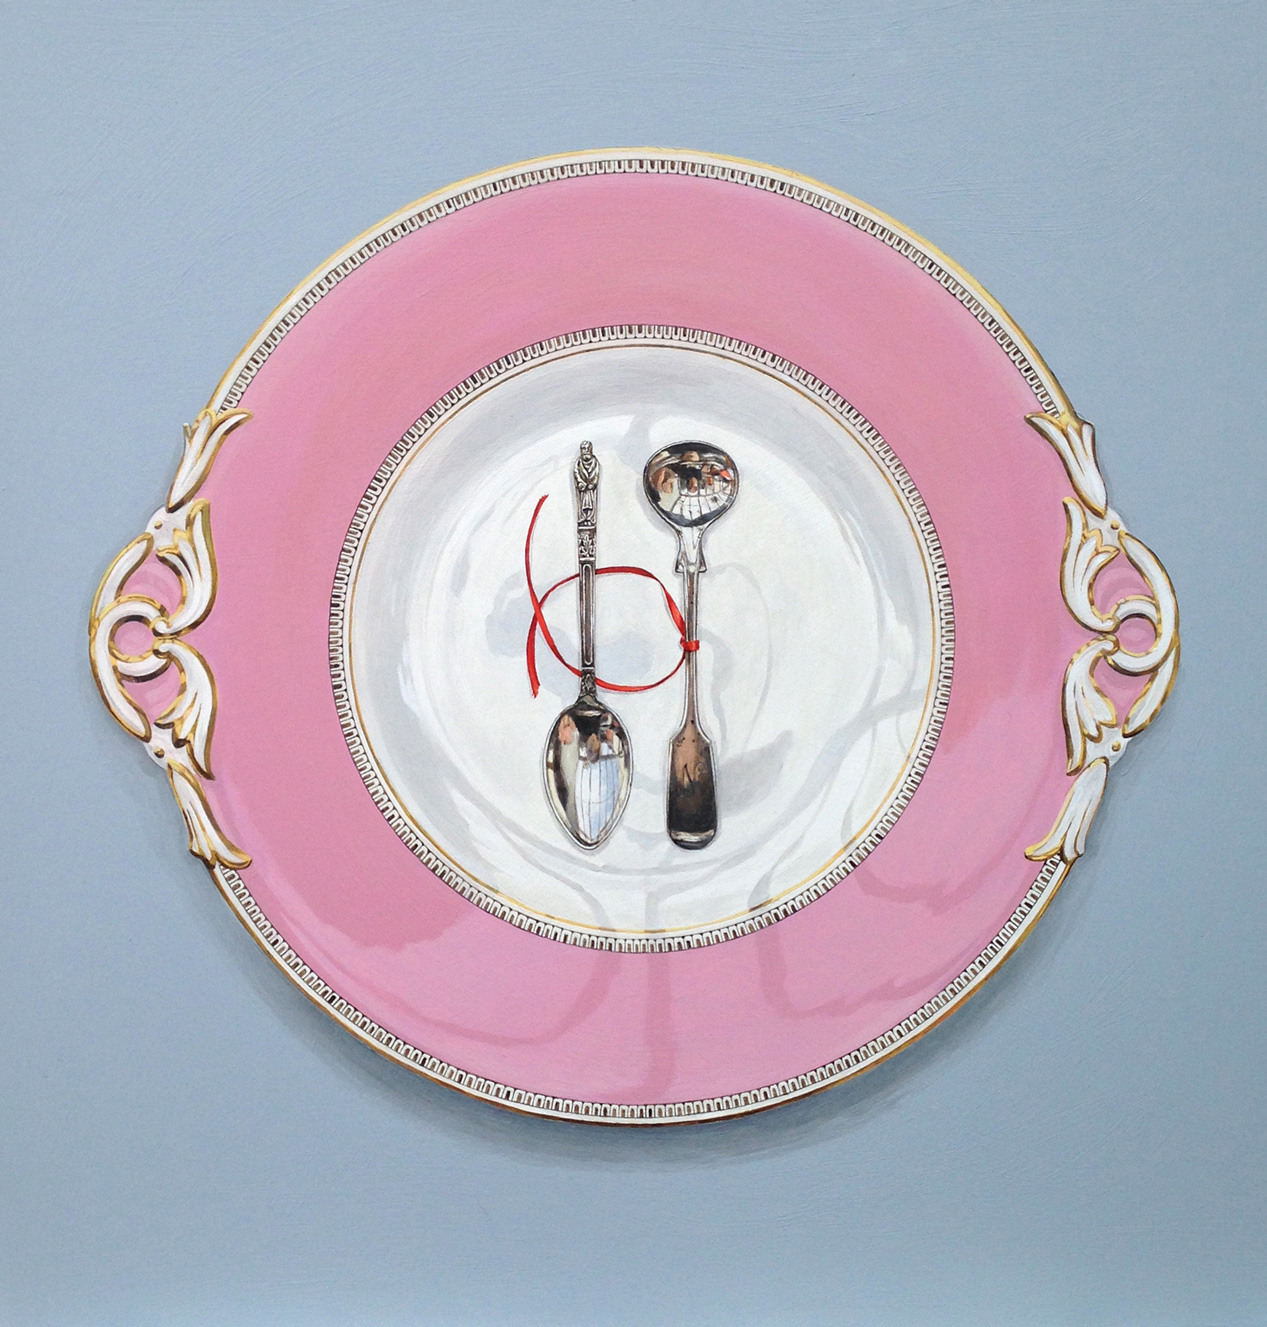 Worcester plate with two spoons and red ribbon